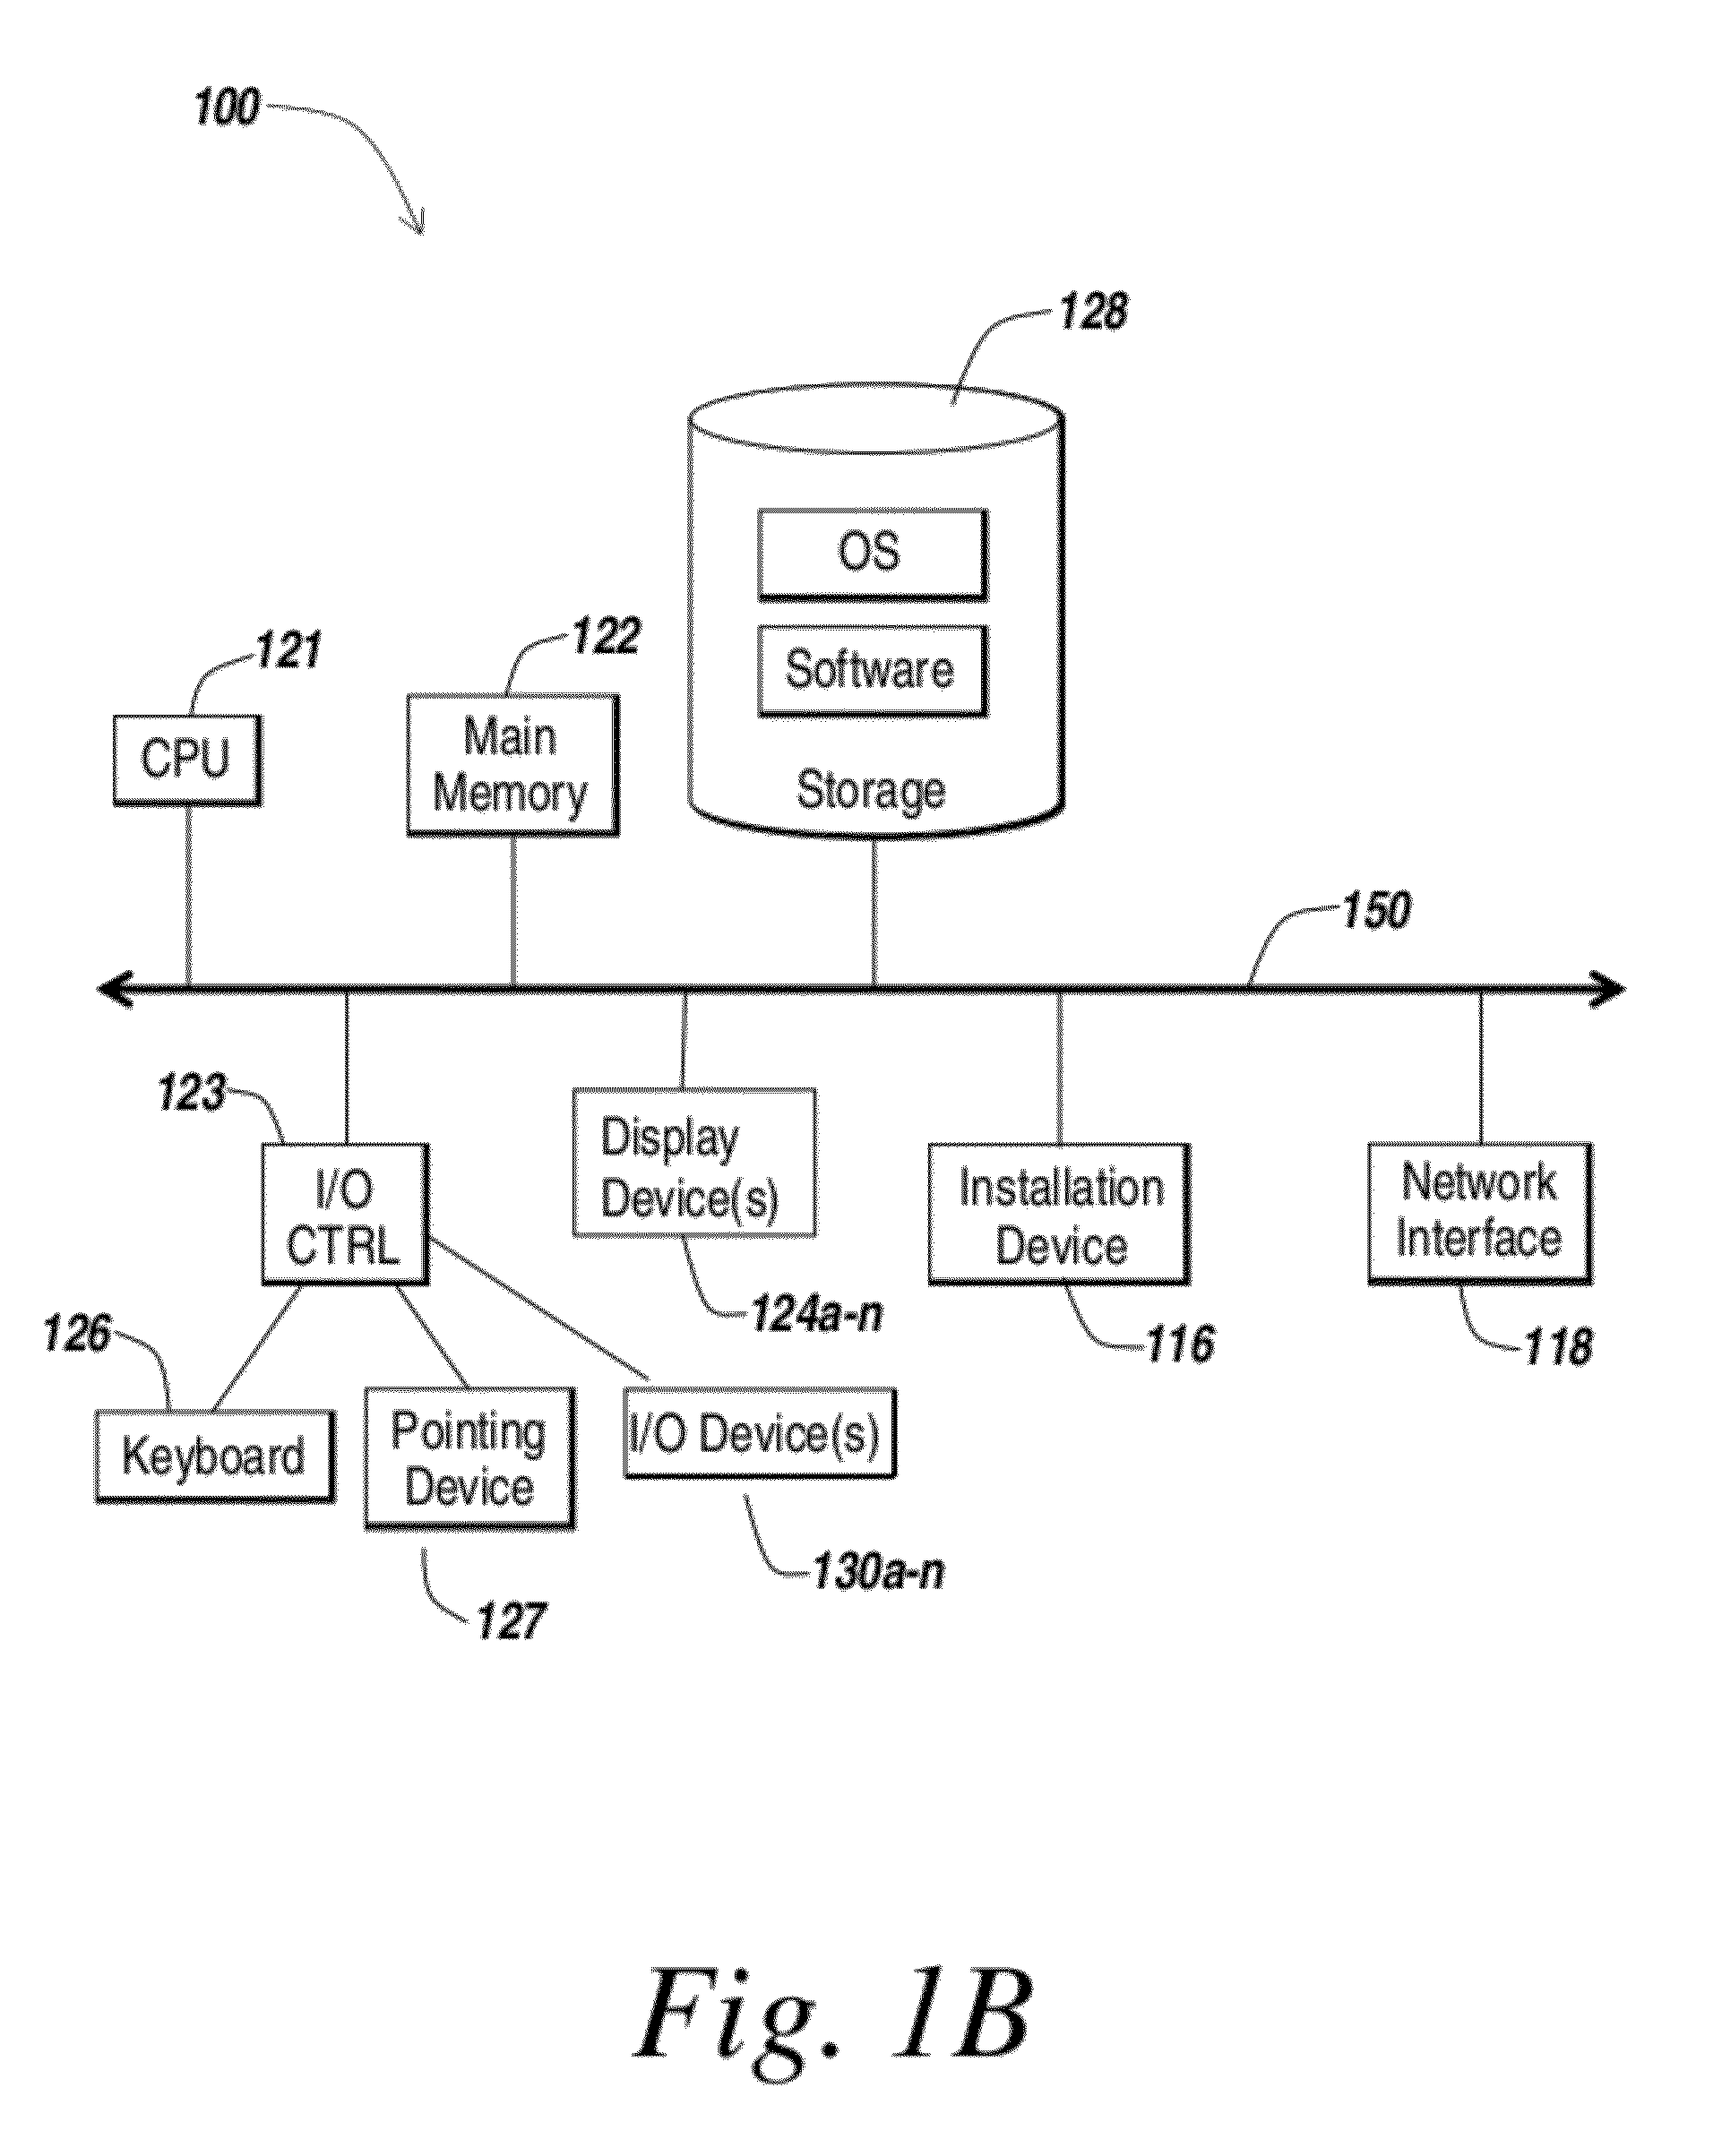 Methods and Systems for Enabling Applications on a Mobile Computing Device to Access Data Associated with a Peripheral Medical Device